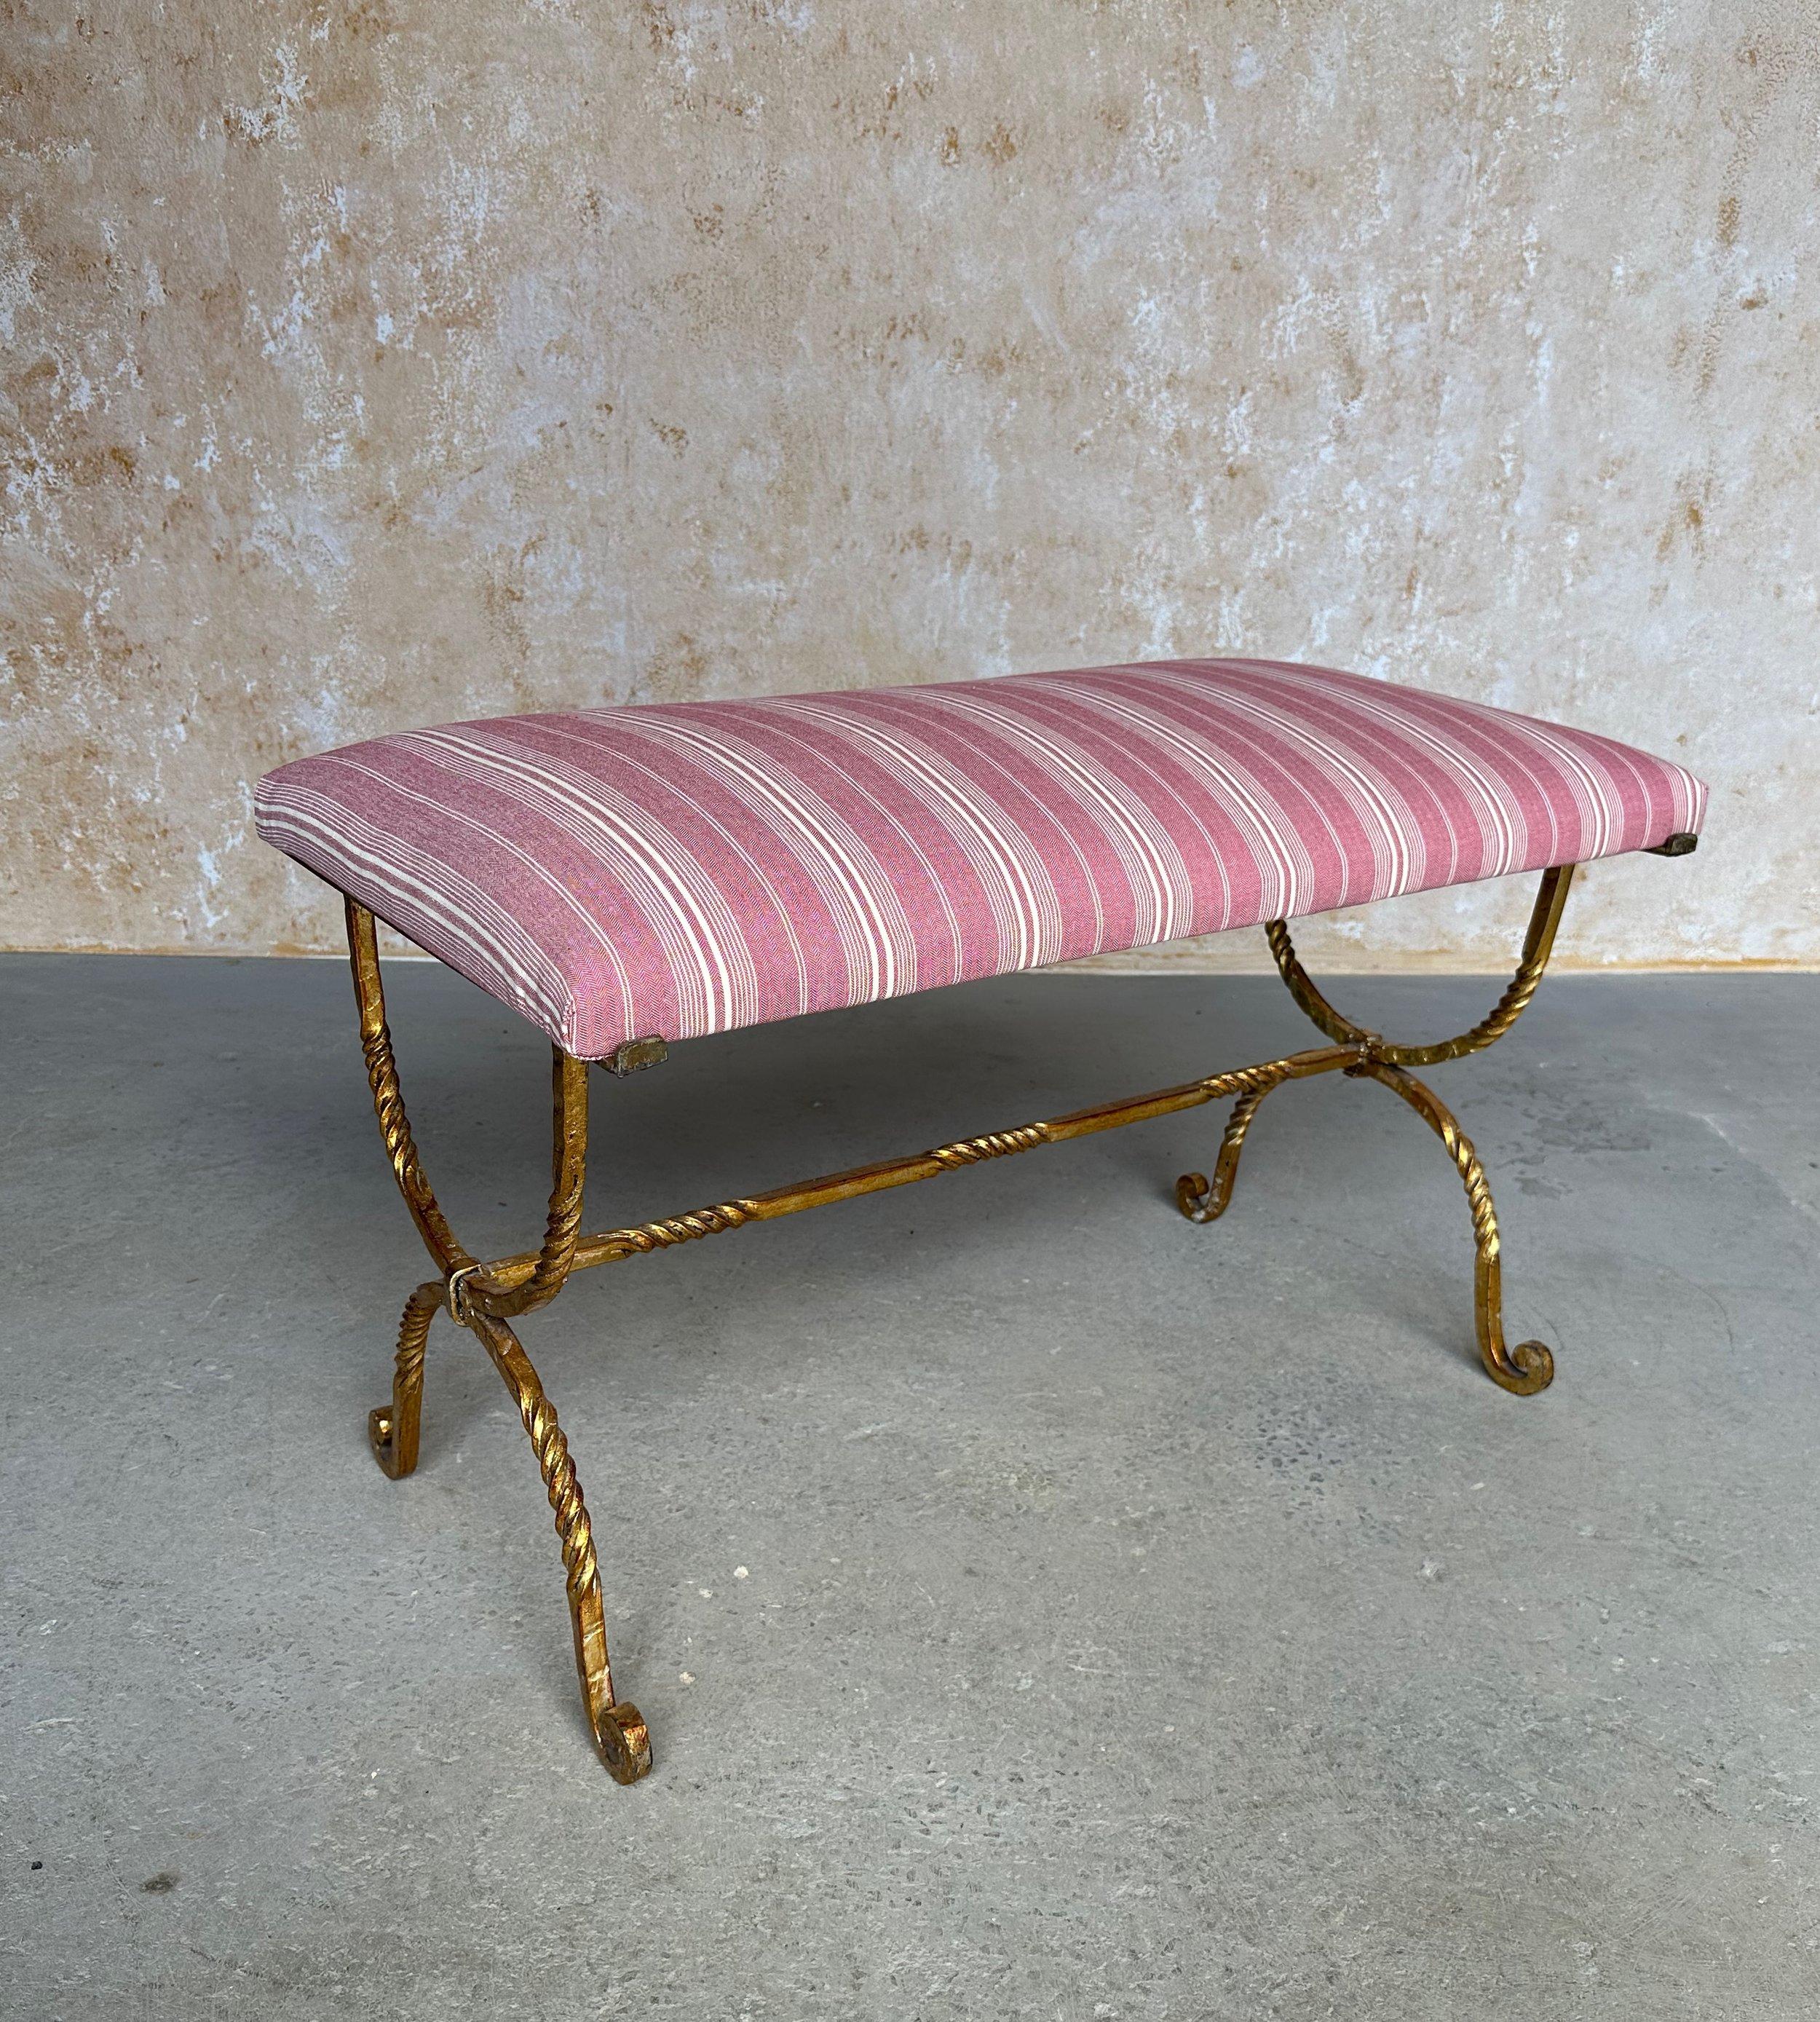 This lovely vintage 1950s Spanish gilt iron bench features an ornate hand forged twisted hourglass frame with central stretcher and beautifully scrolled feet. The rich gilt finish is hand-applied and the seat is upholstered in fashionable mauve